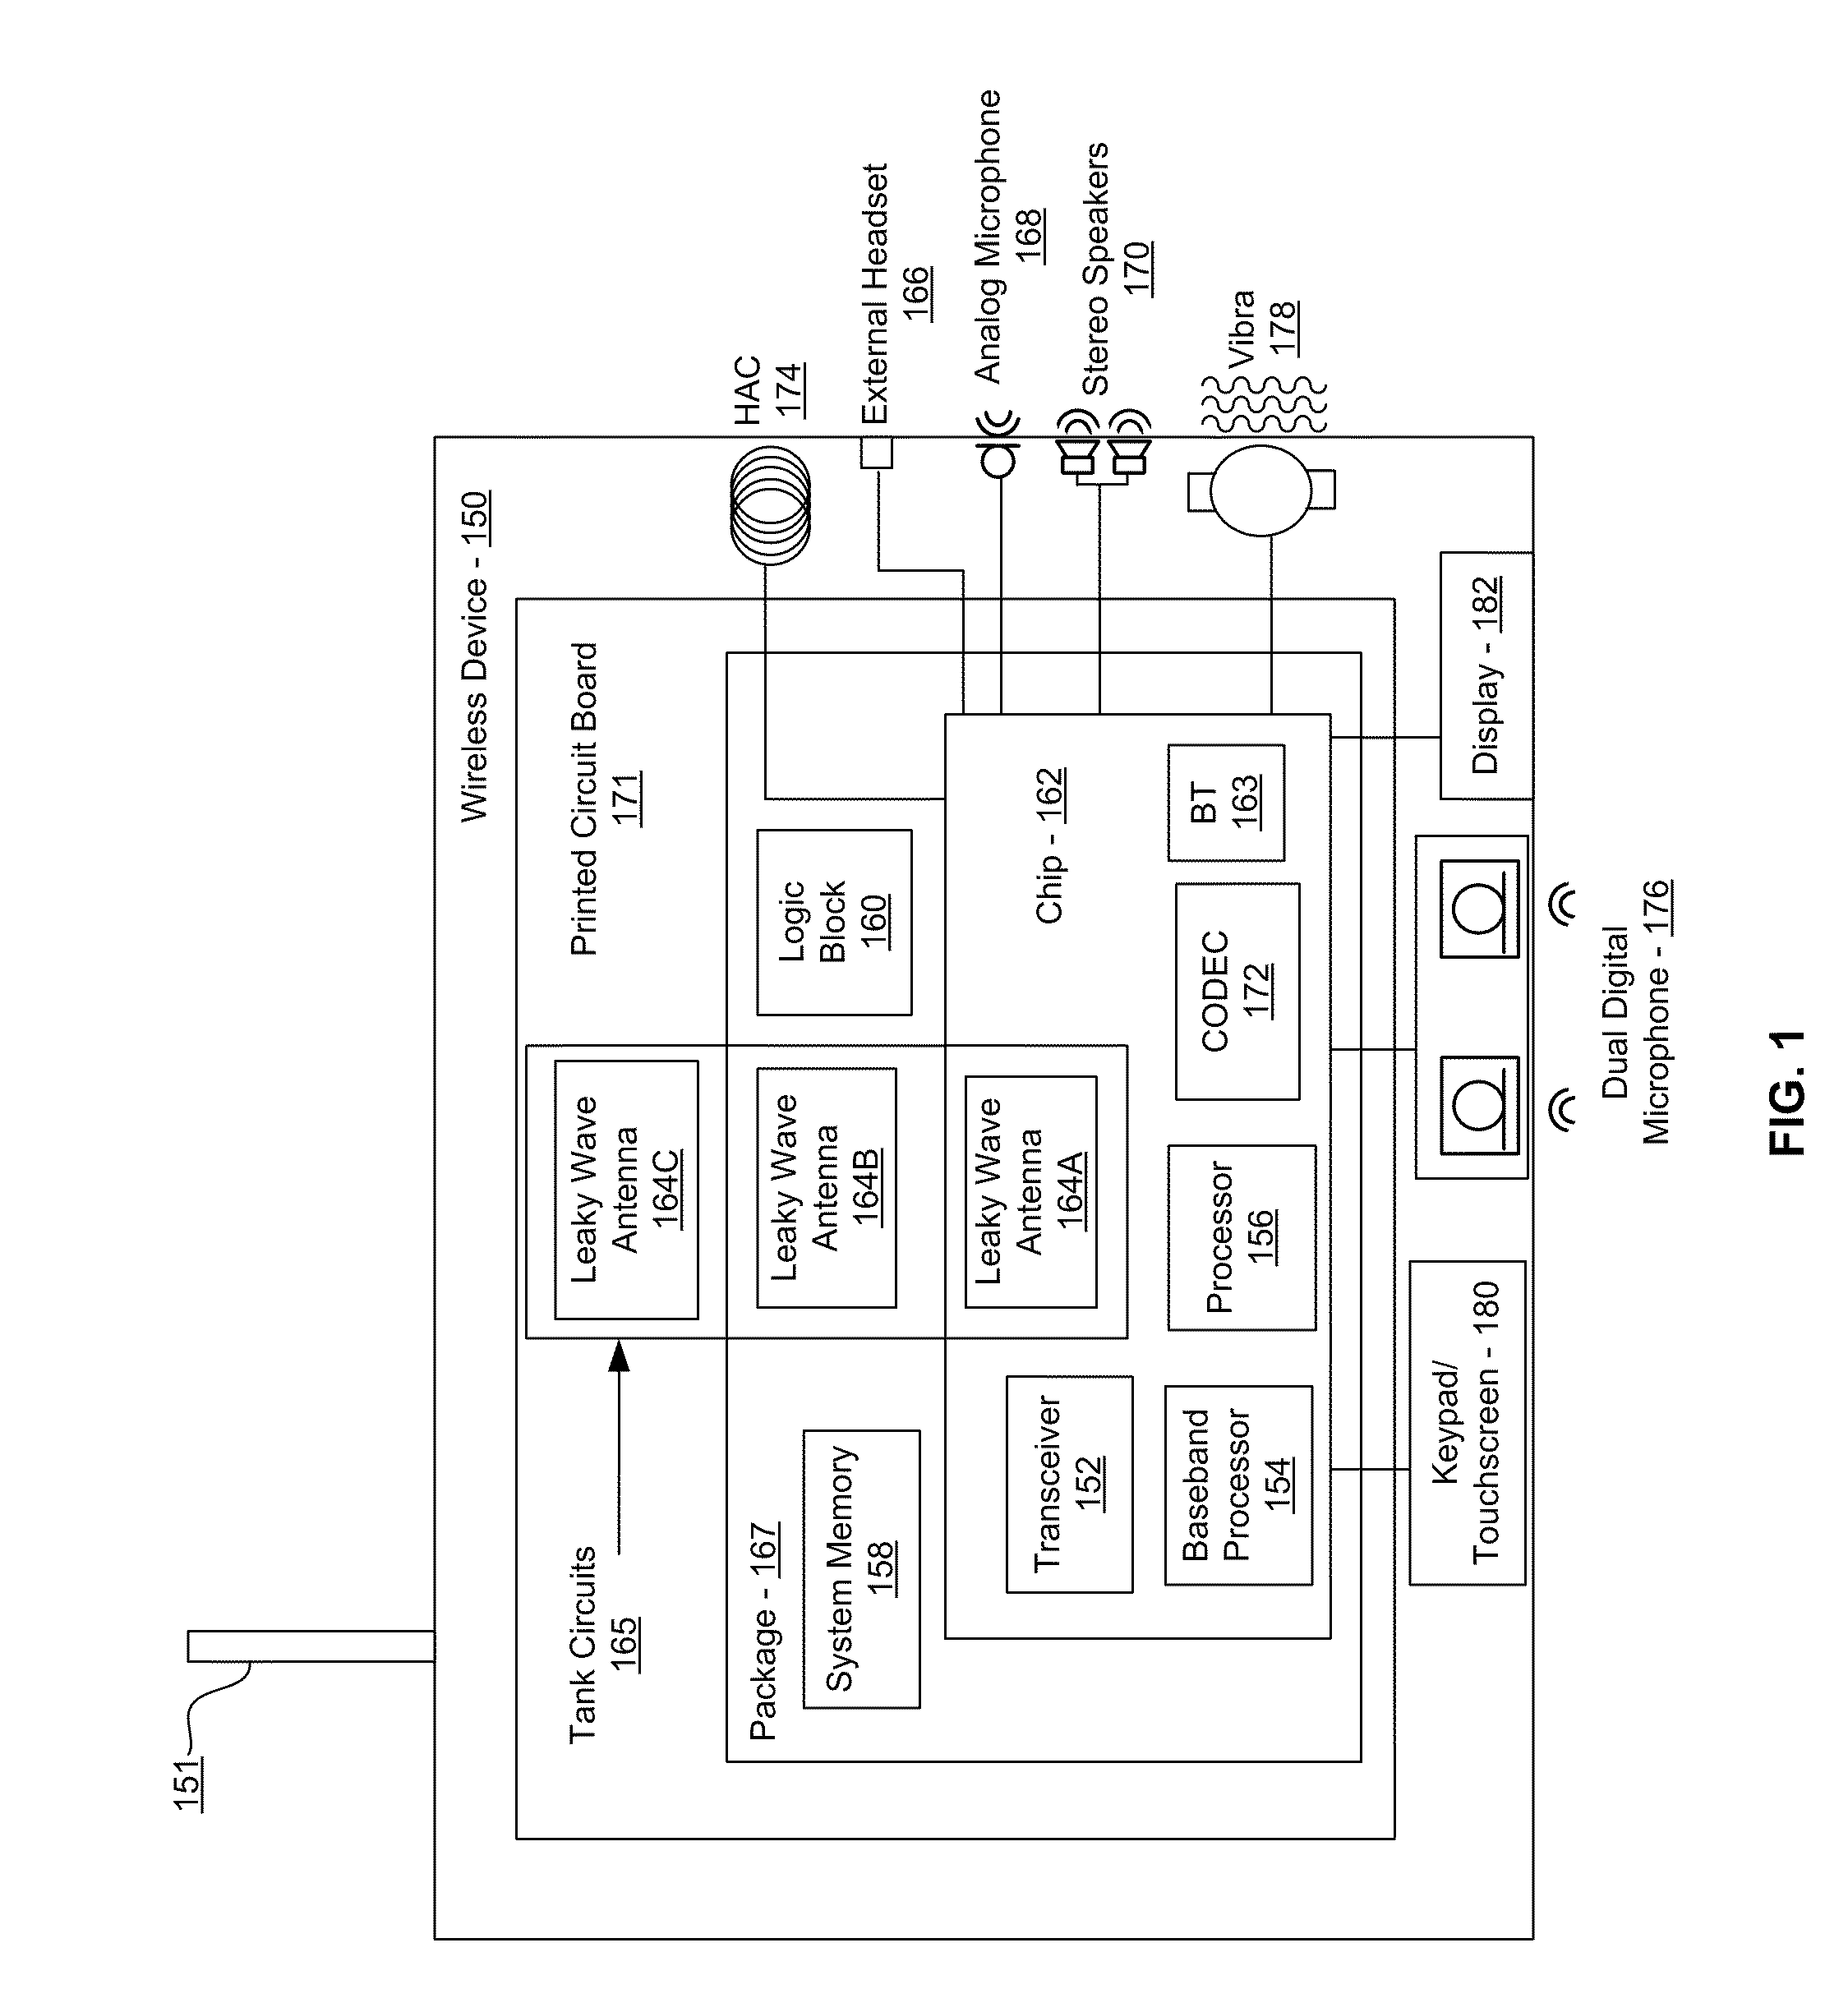 Method and System for a Voltage-Controlled Oscillator with a Leaky Wave Antenna